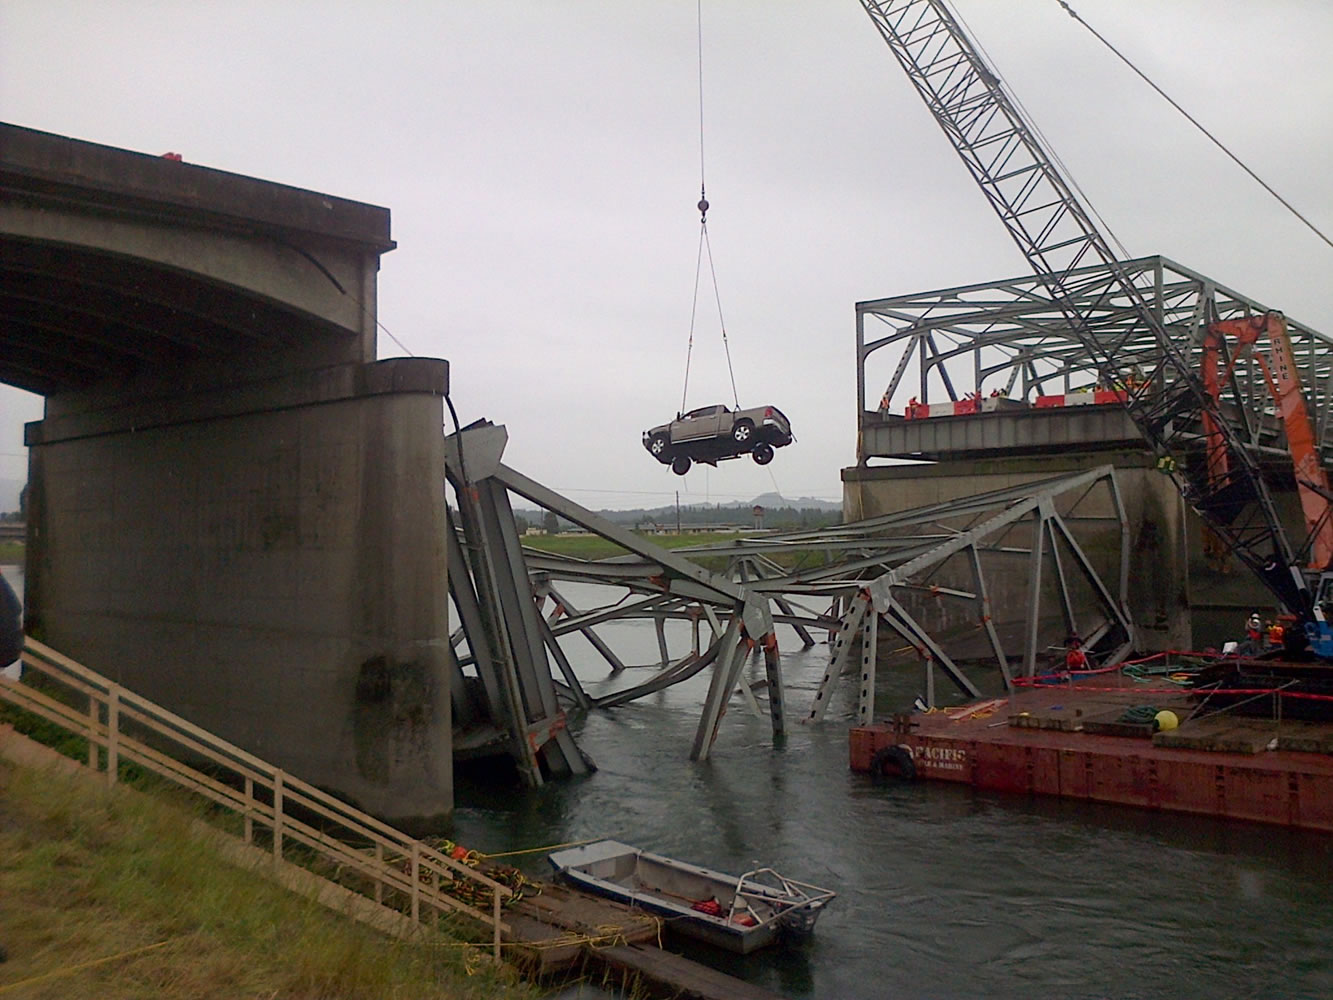 Washington Department of Transportation files
A crane removes a pickup May 27 from the wreckage of the Interstate 5 bridge over the Skagit River in Mount Vernon. A similar steel truss bridge carrying I-5 over the East Fork of the Lewis River is listed in worse condition. Officials hope to replace it within 15 years.